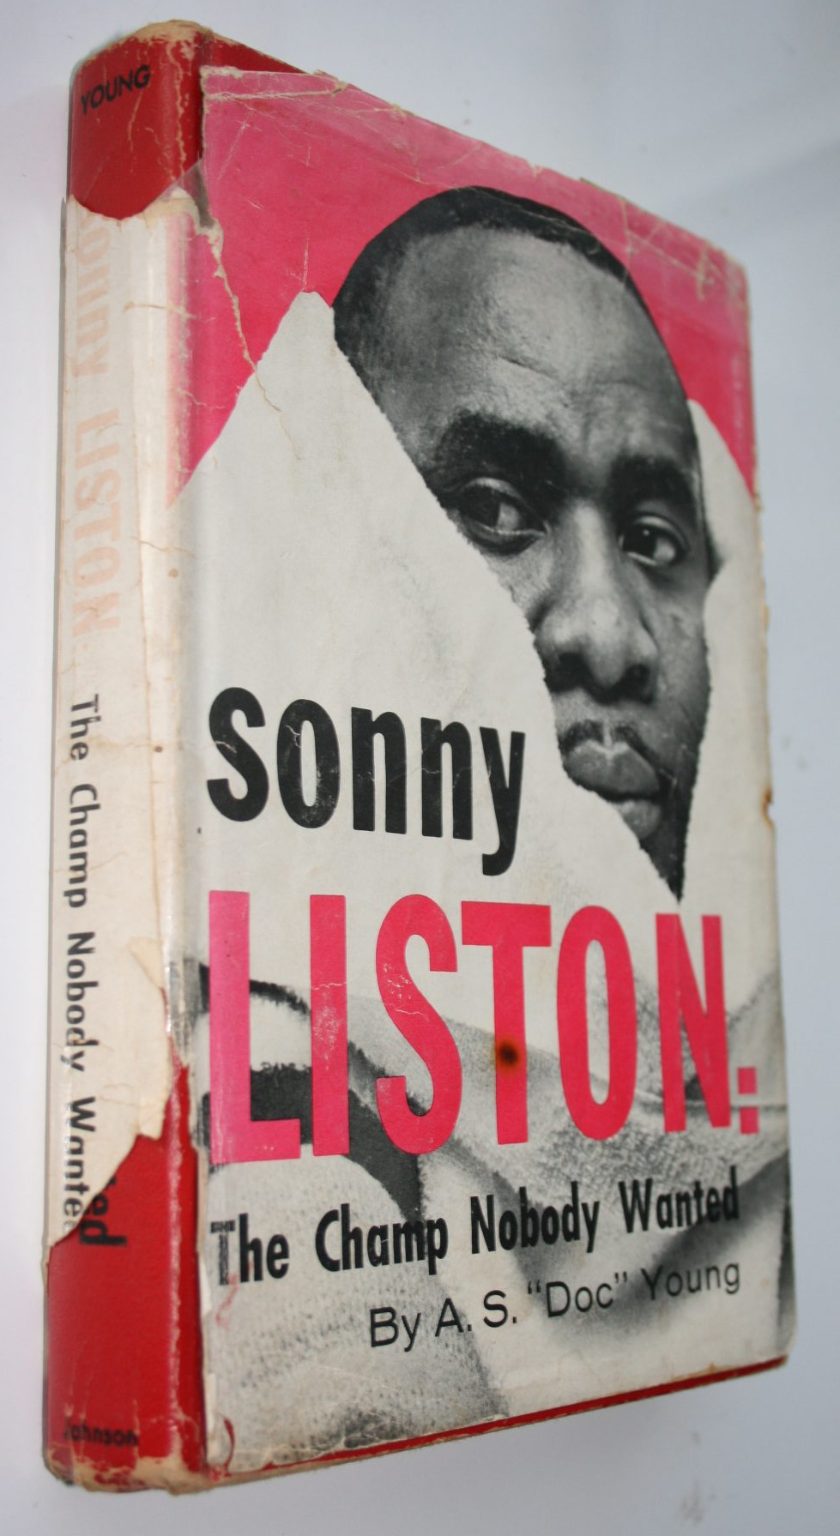 Sonny Liston: The Champ Nobody Wanted BY A.S. (Doc) Young. 1963, first edition.